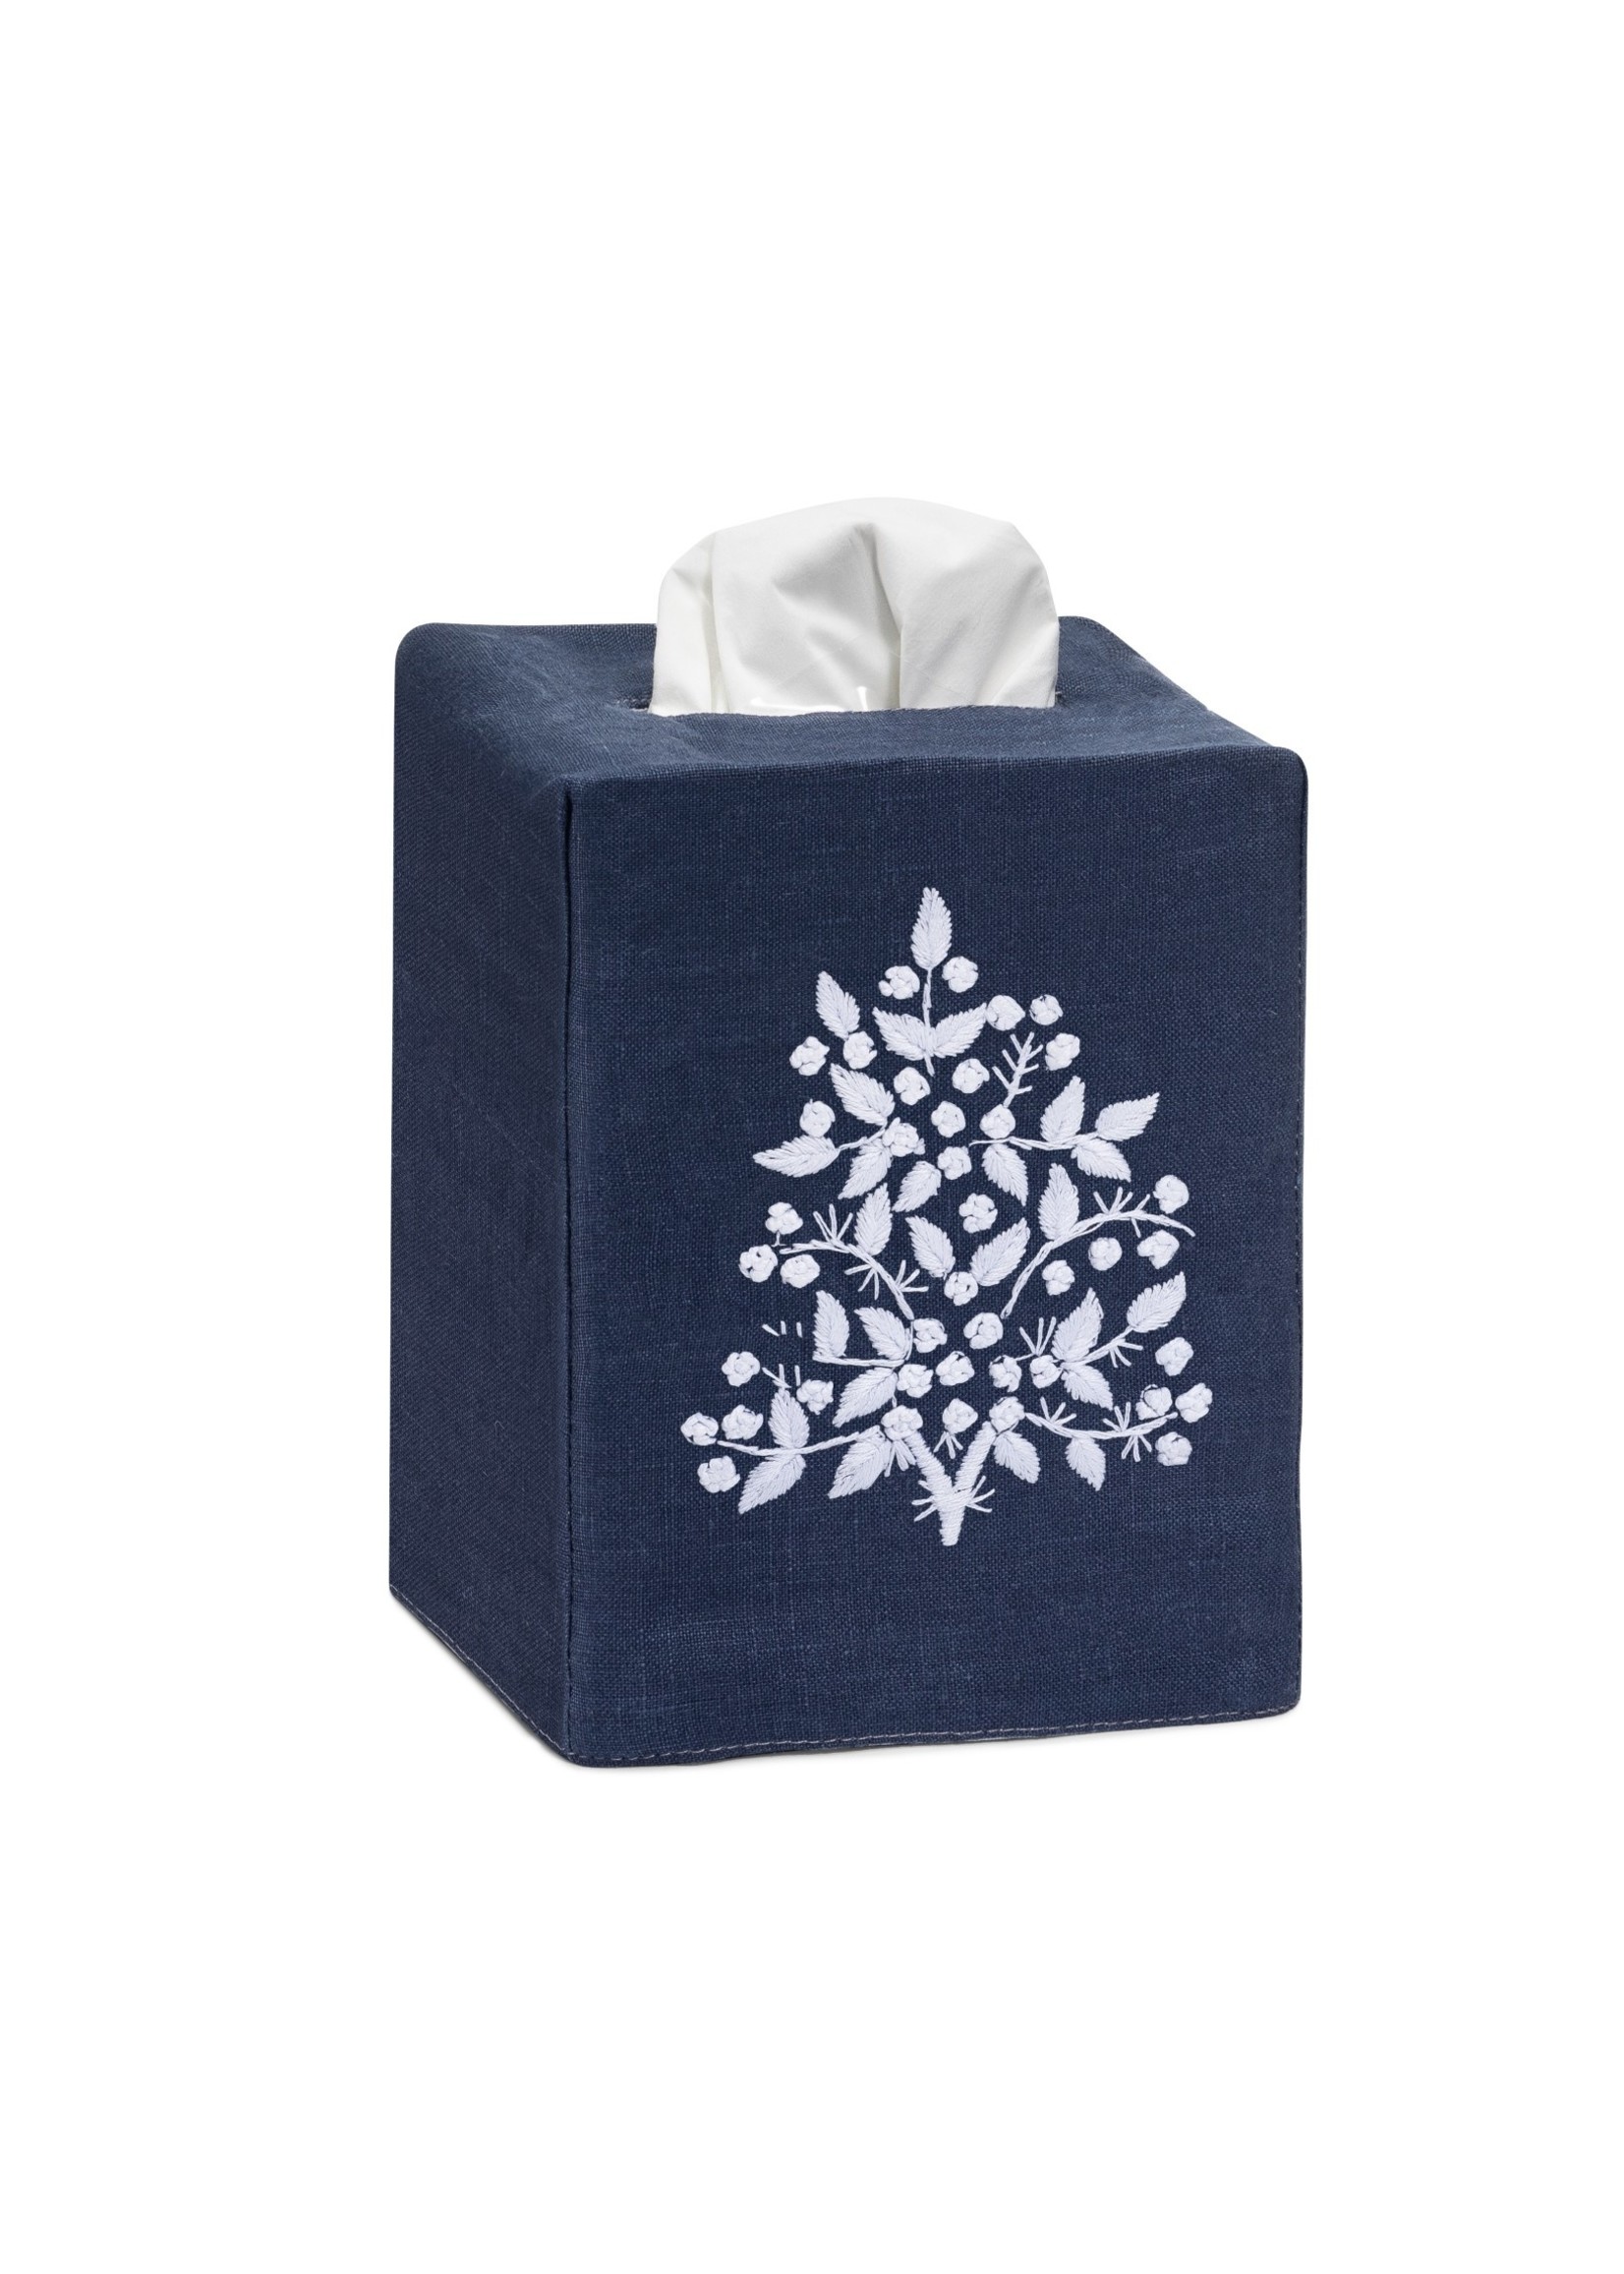 Tissue Box Cover - Jardin Navy with White - Maison Blue